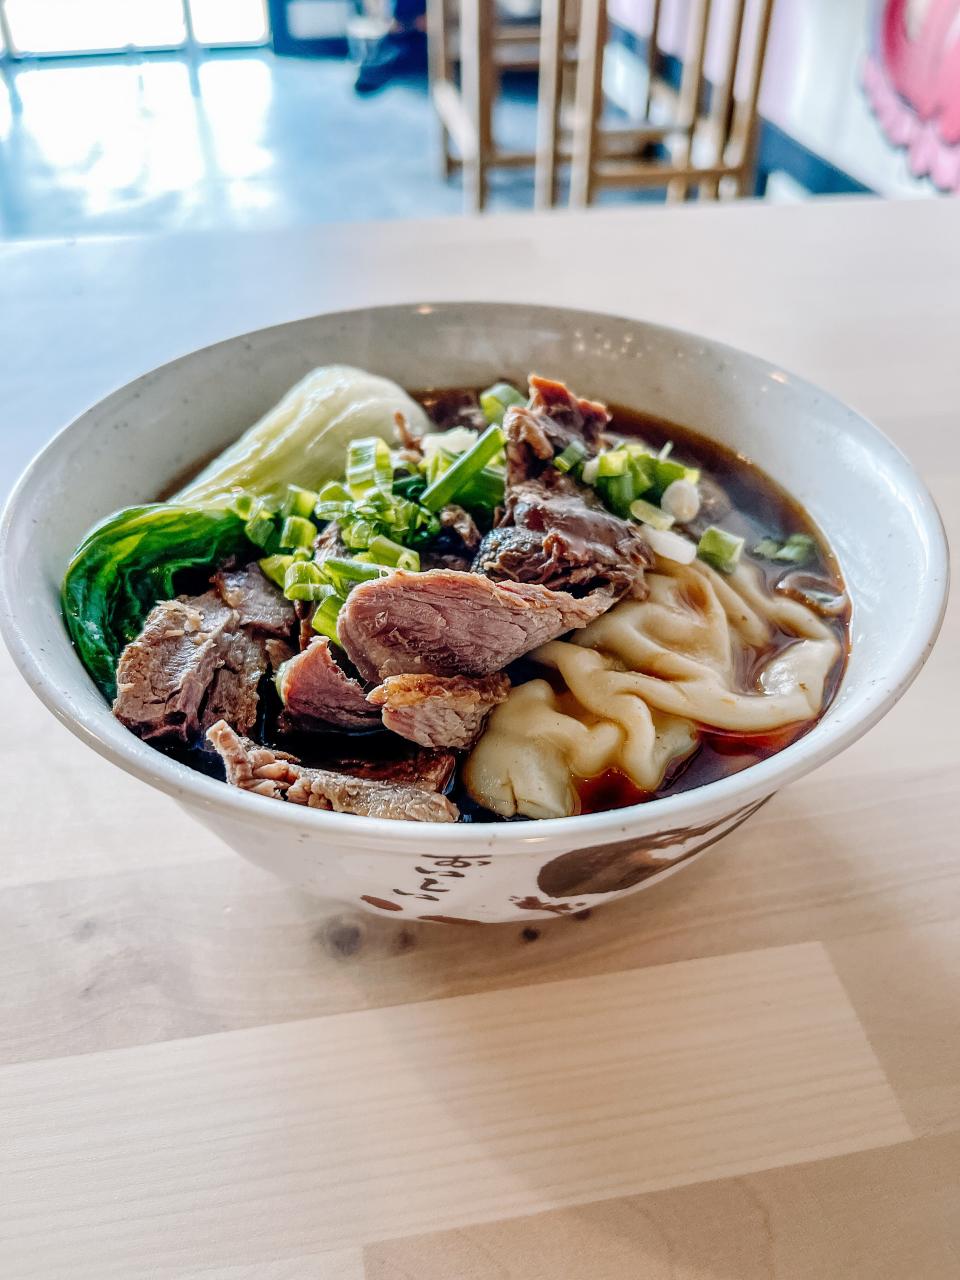 “Our braised beef noodle soup takes 3½ hours. We thought it would last, but we ran out," said Angry Dumplings’ owner Jason Chau, of their Father’s Day soft opening.